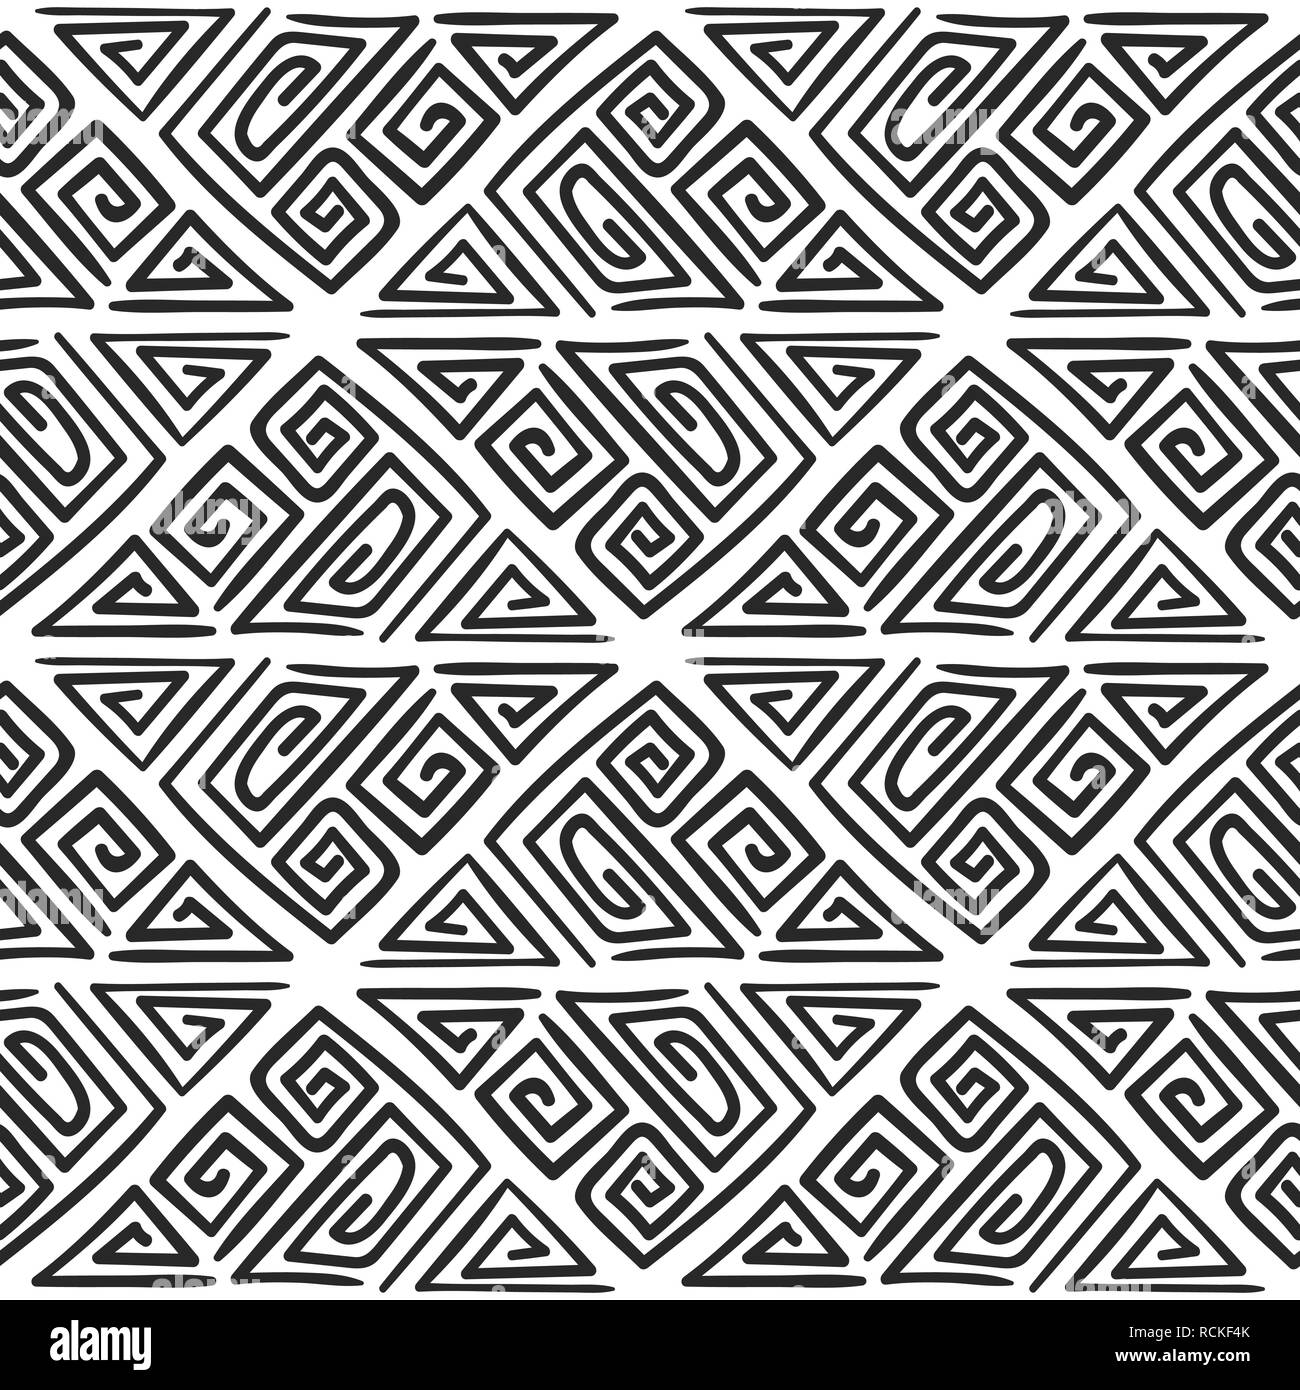 Abstract monochrome seamless hand drawn pattern Stock Vector